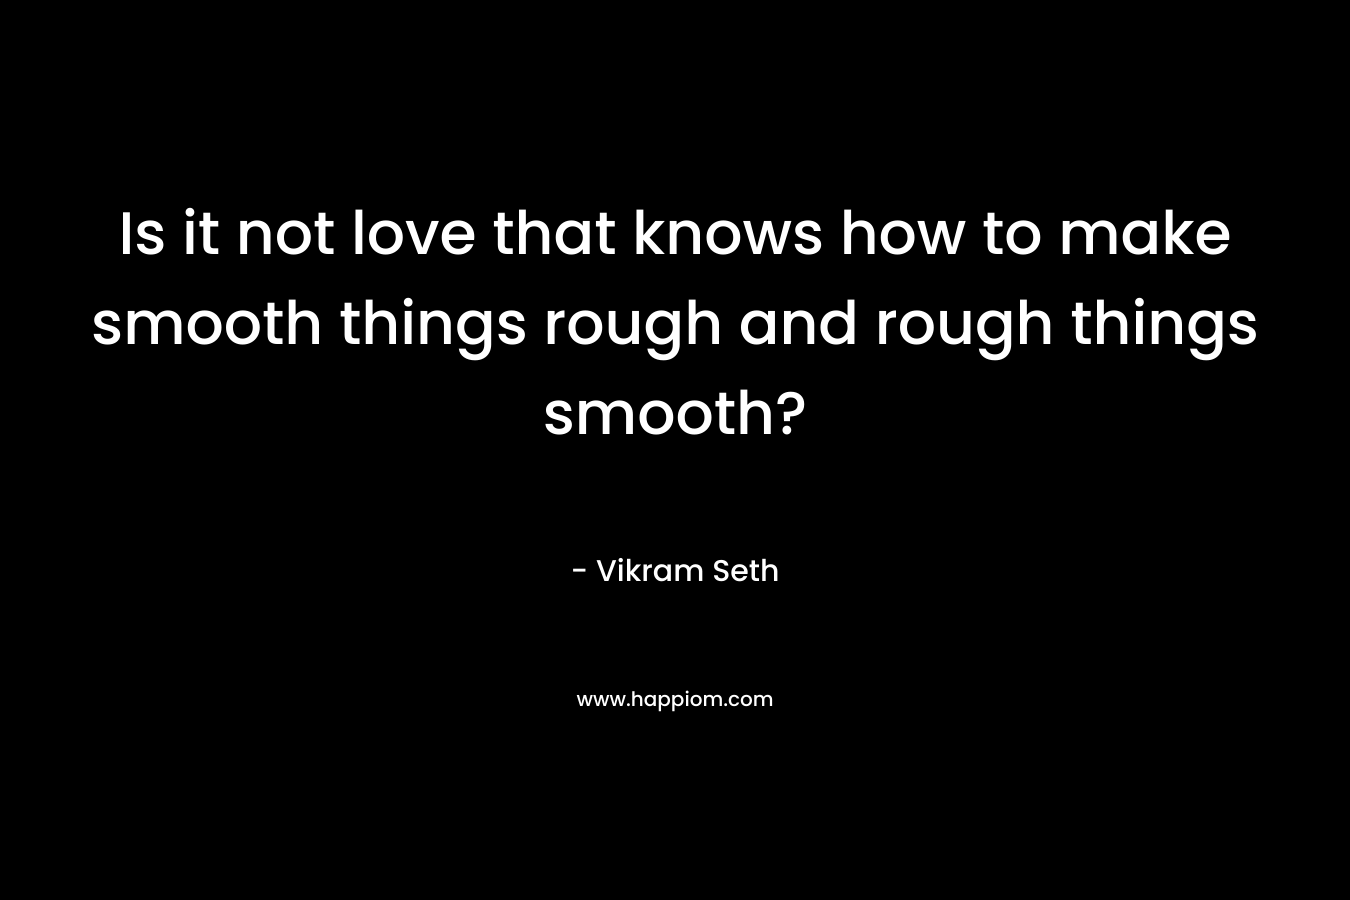 Is it not love that knows how to make smooth things rough and rough things smooth? – Vikram Seth